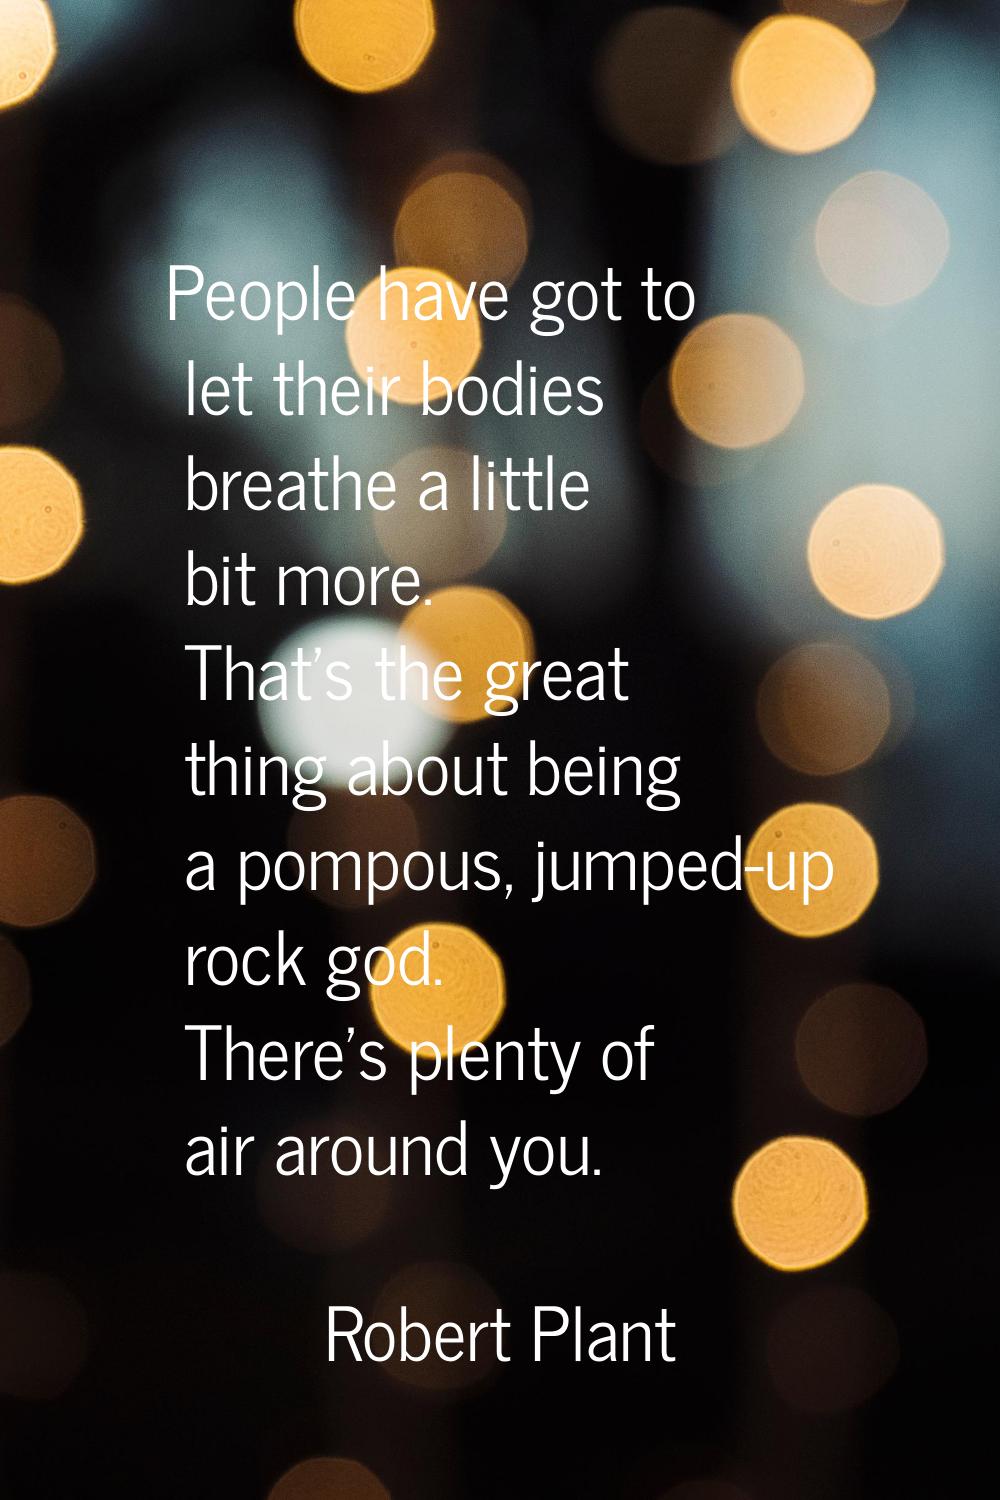 People have got to let their bodies breathe a little bit more. That's the great thing about being a